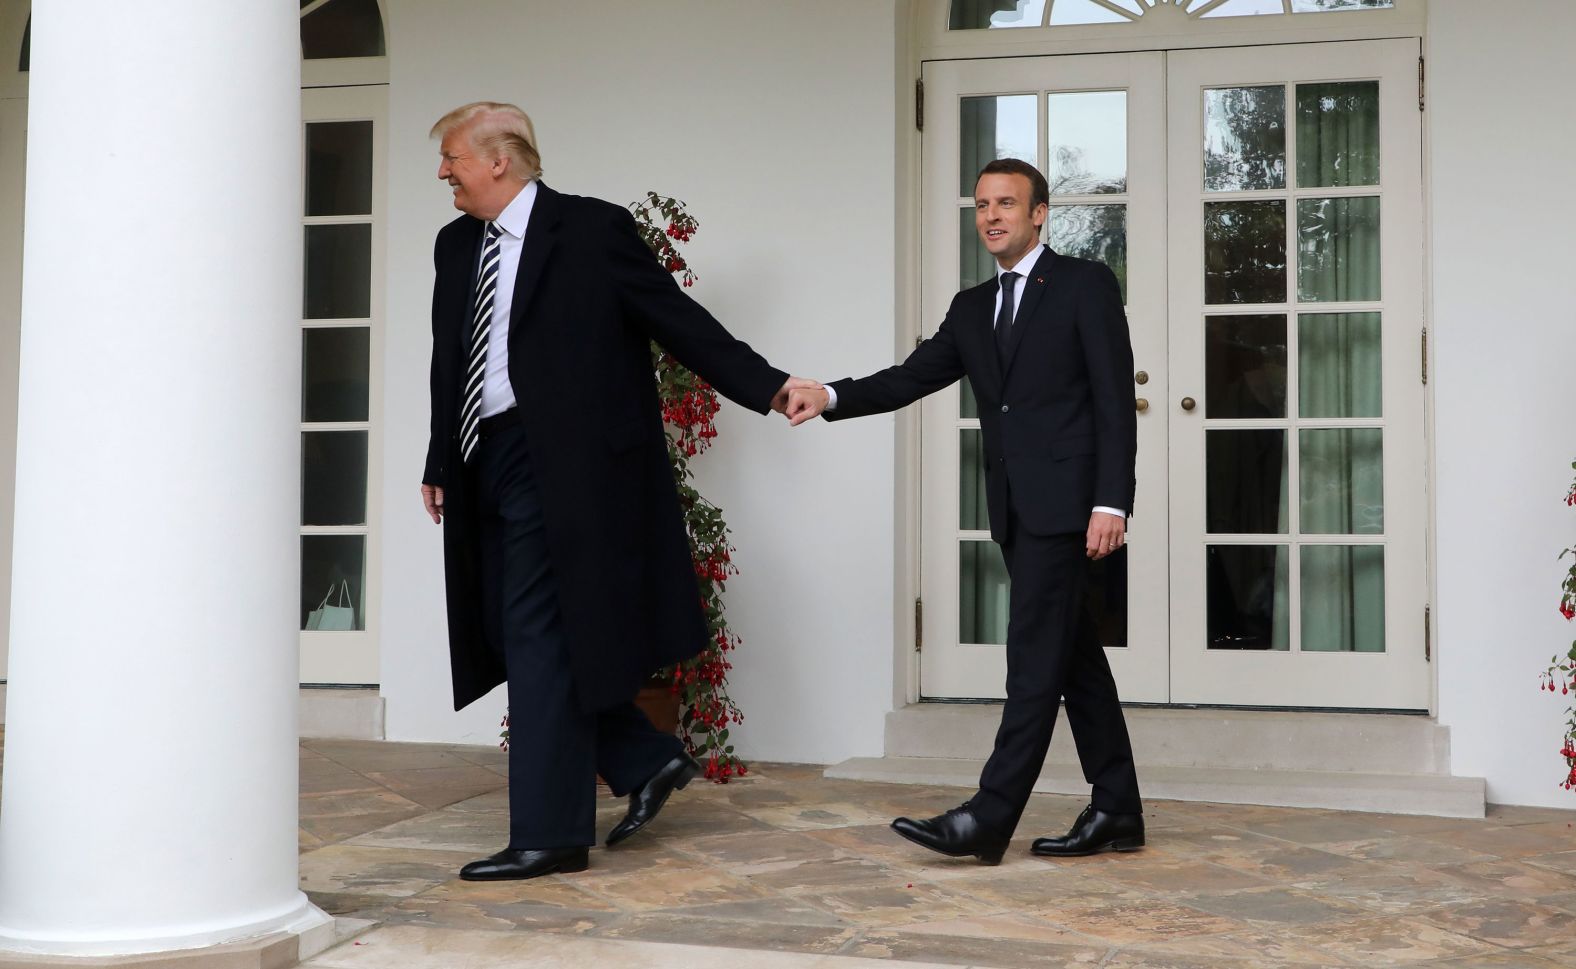 Trump and French President Emmanuel Macron walk to the Oval Office before a meeting at the White House in April 2018. Speaking before US lawmakers from both the Senate and the House,<a href="index.php?page=&url=https%3A%2F%2Fwww.cnn.com%2F2018%2F04%2F25%2Fpolitics%2Ffrance-president-emmanuel-macron-joint-address-congress%2Findex.html" target="_blank"> Macron pressed the United States to engage more in global affairs,</a> contrasting with the steps the Trump White House has taken toward isolationism since he came into office.